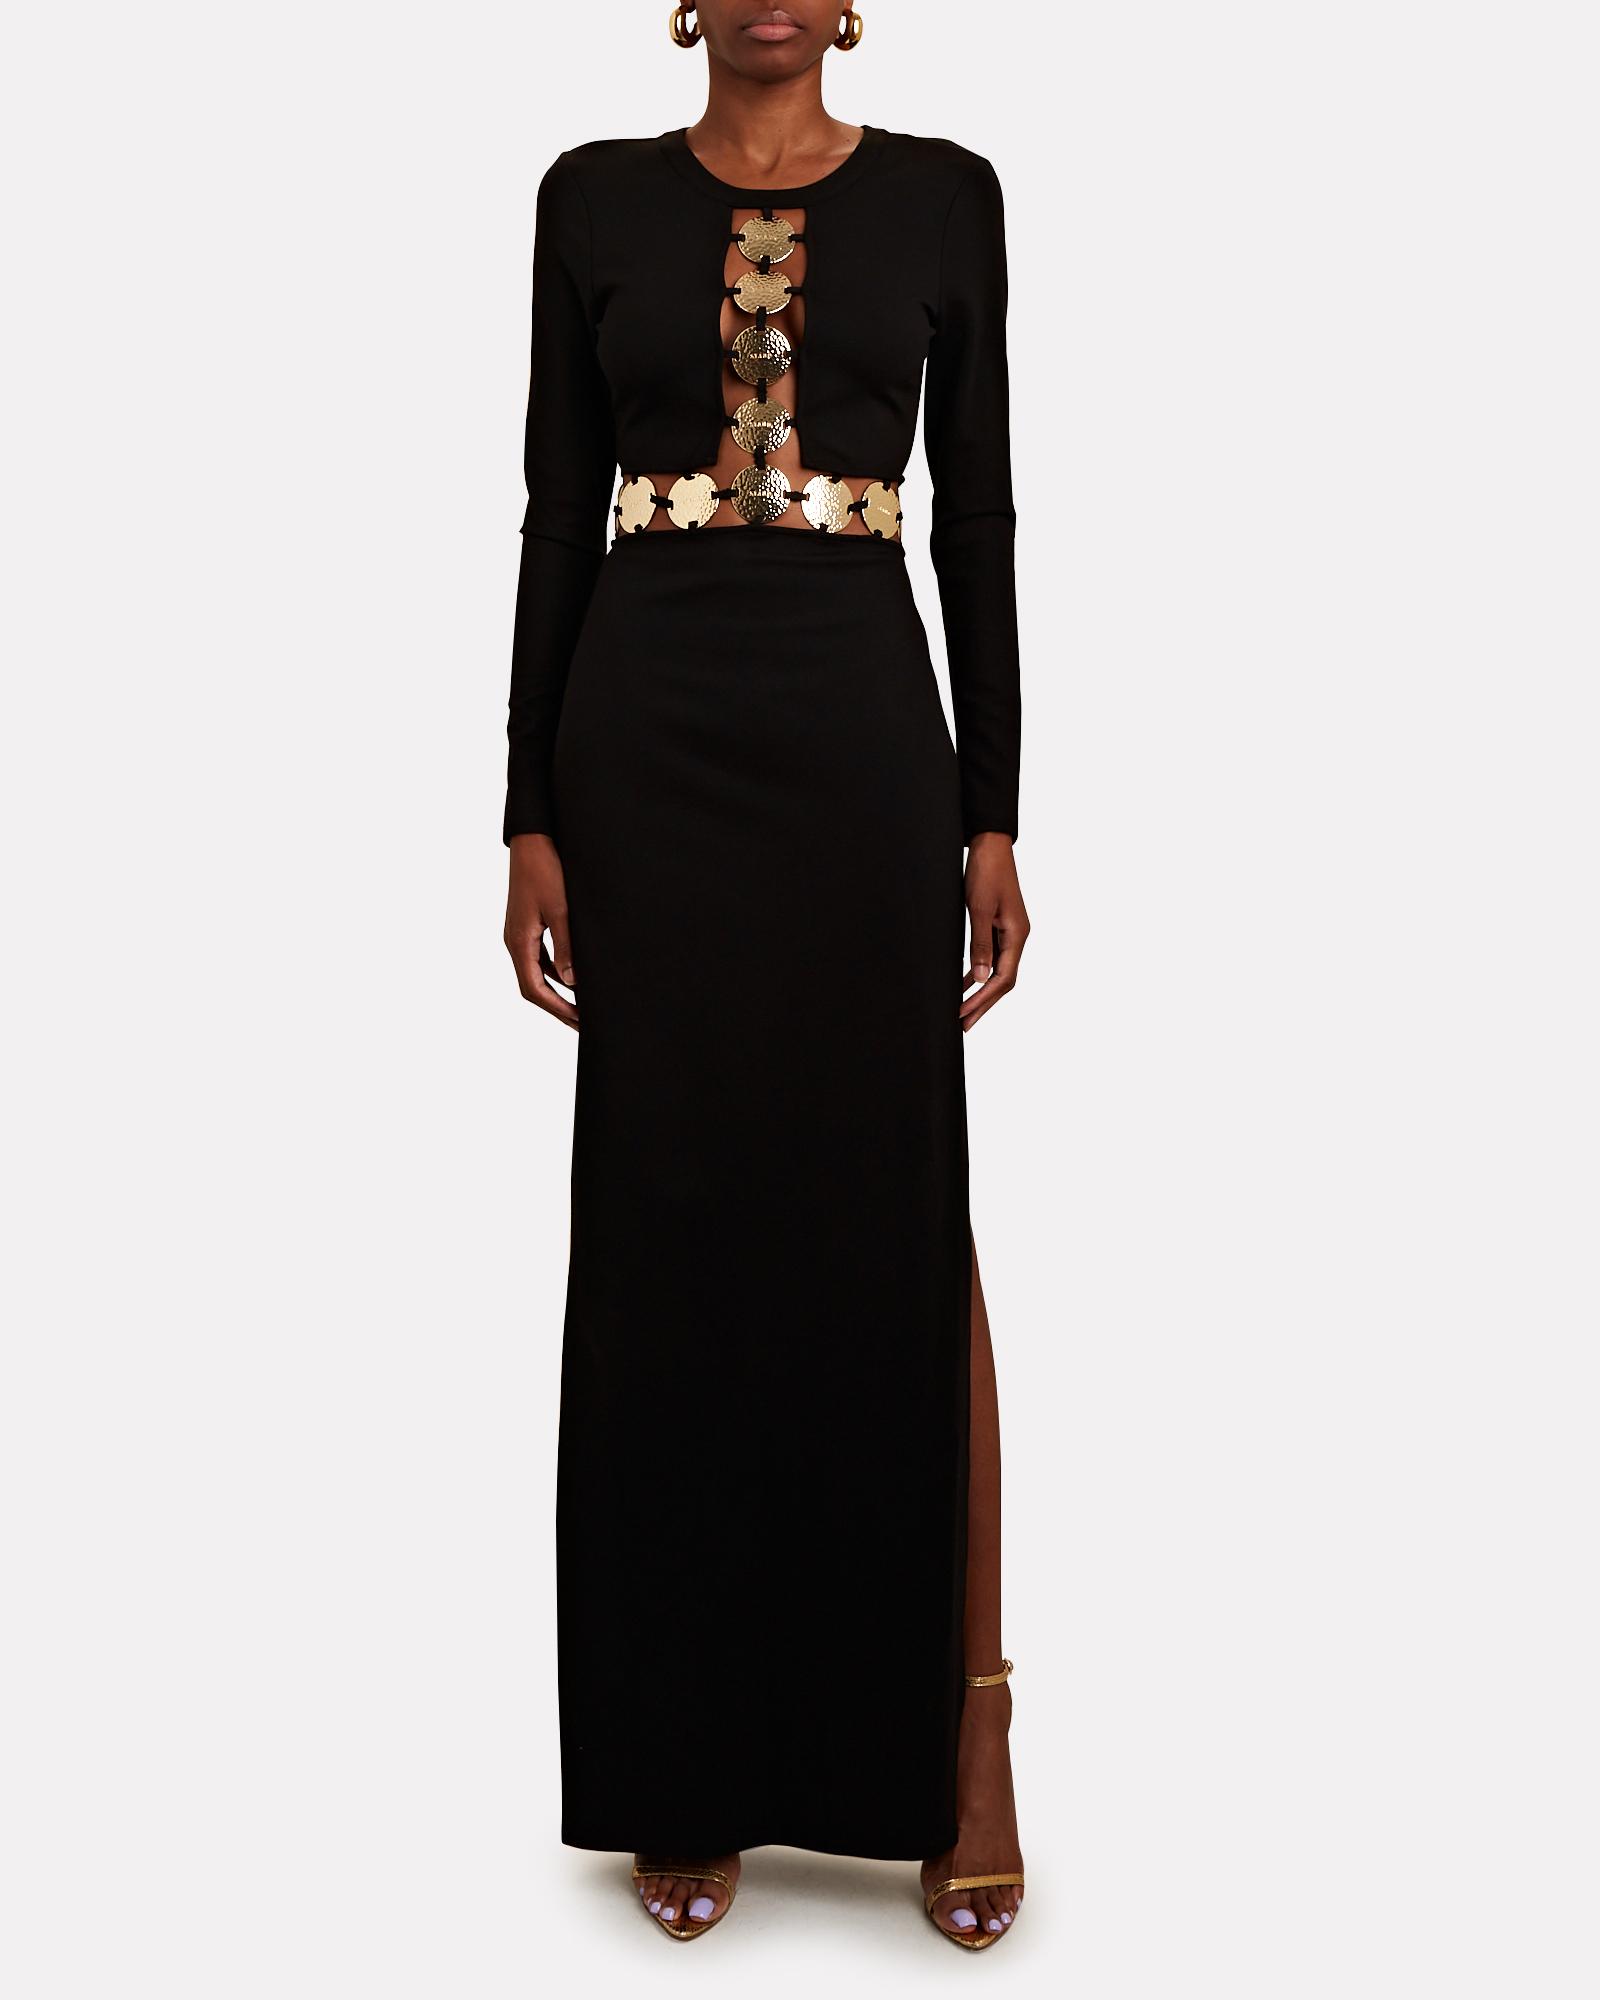 STAUD Delphine Embellished Cut-out Maxi Dress in Black Lyst